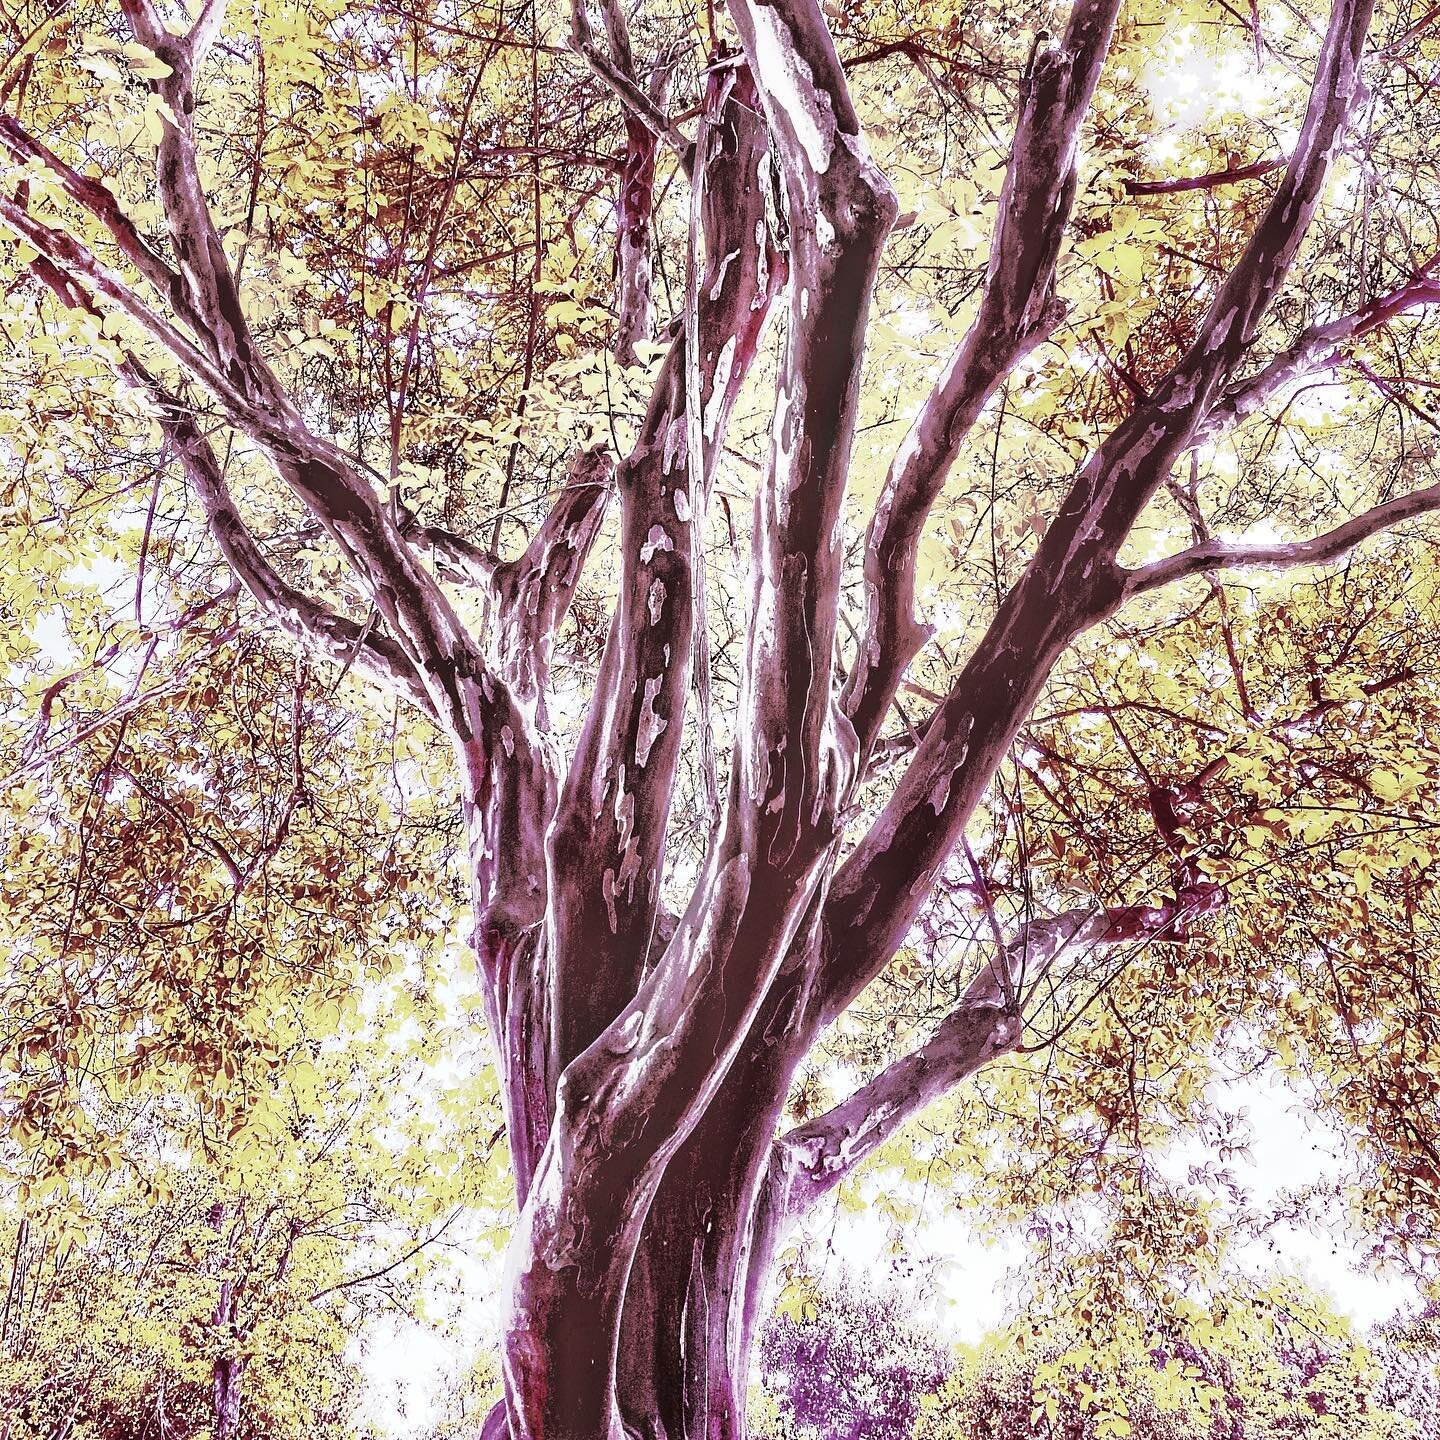 &ldquo;Nothing in life is to be feared, it is only to be understood. Now is the time to understand more, so that we may fear less.&rdquo; Marie Curie

#light #sun #quarantinelife #dailywalk #mantra #lockdown #quarantine #tree.